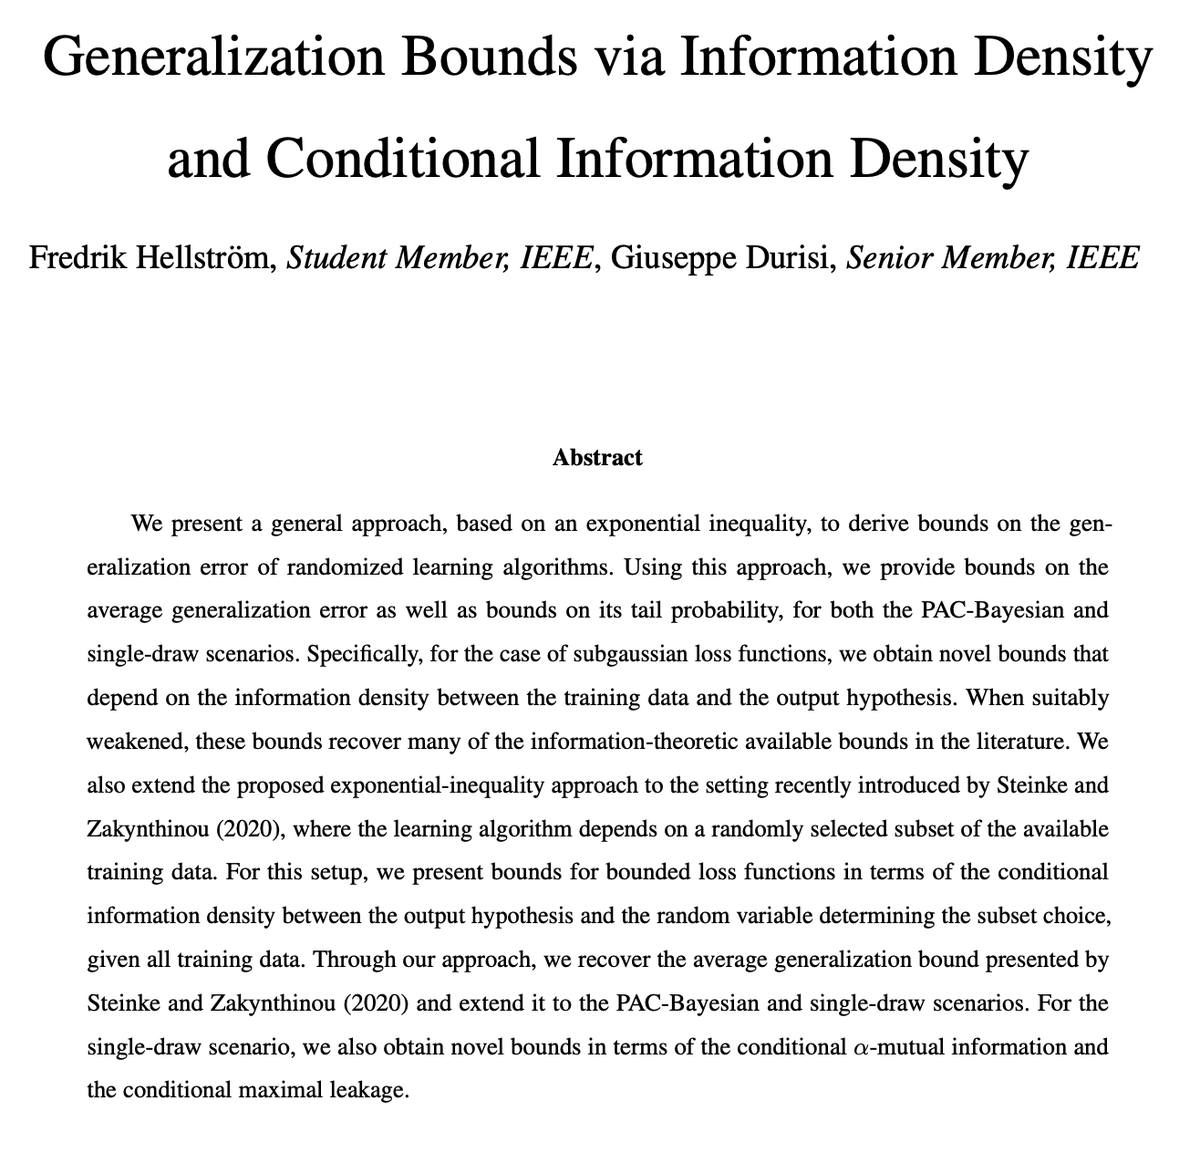 Information-theoretic generalization bounds go brrrrr.... https://arxiv.org/abs/2005.08044 Nice ideas in here combining Catoni's single draw setting and the  @shortstein  @zakynthinou framework. I appreciate multiple cites to my group's recent work.